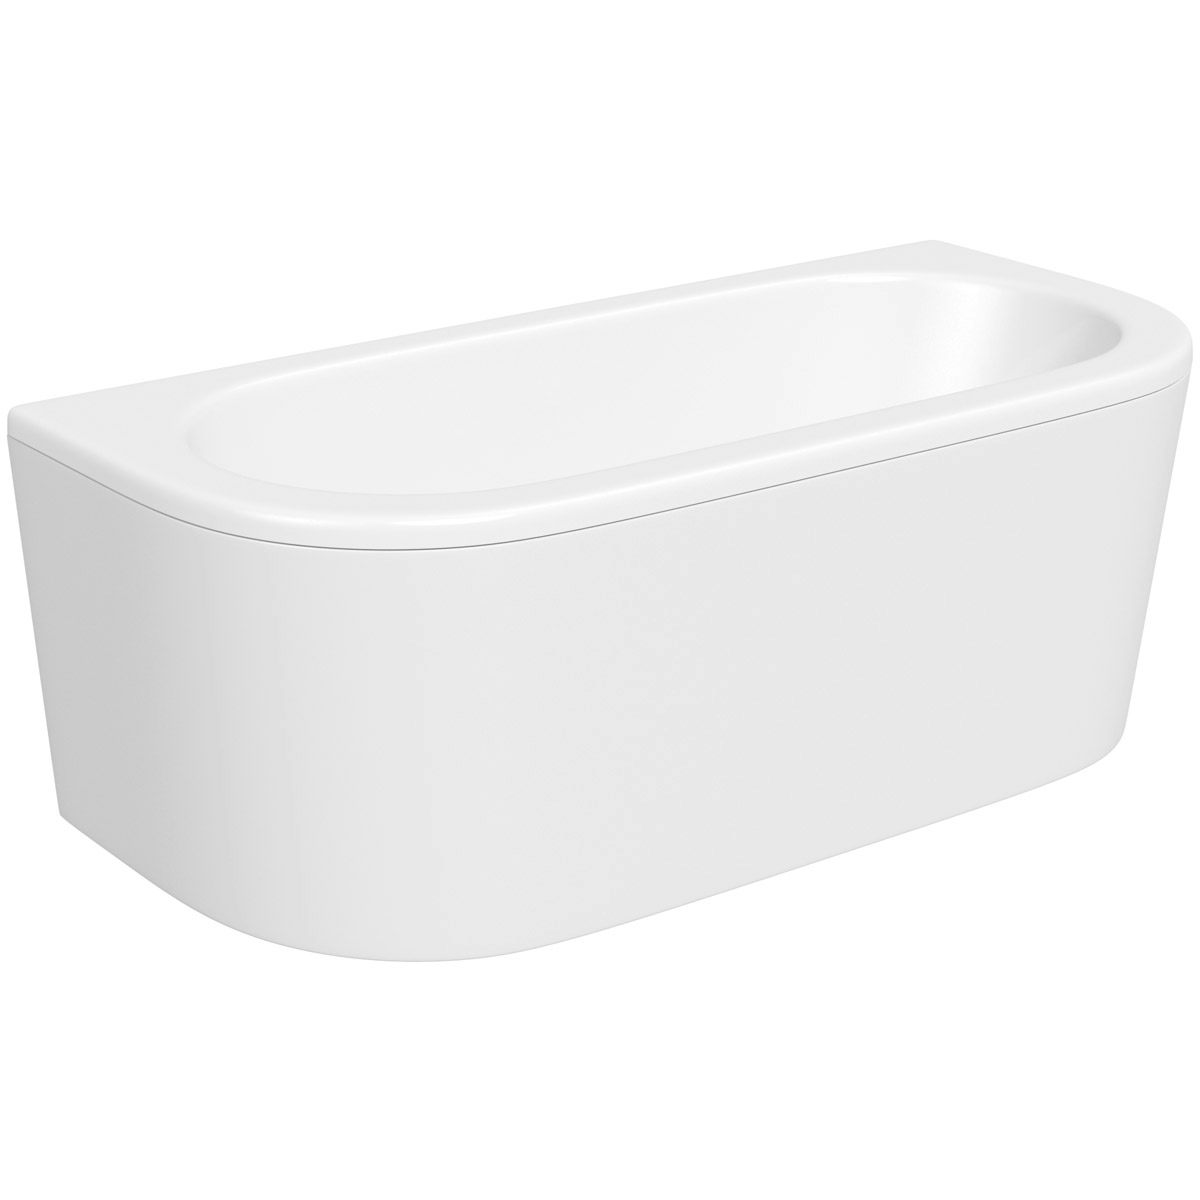 Orchard Elsdon D shaped double ended bath with panel 1700 x 800